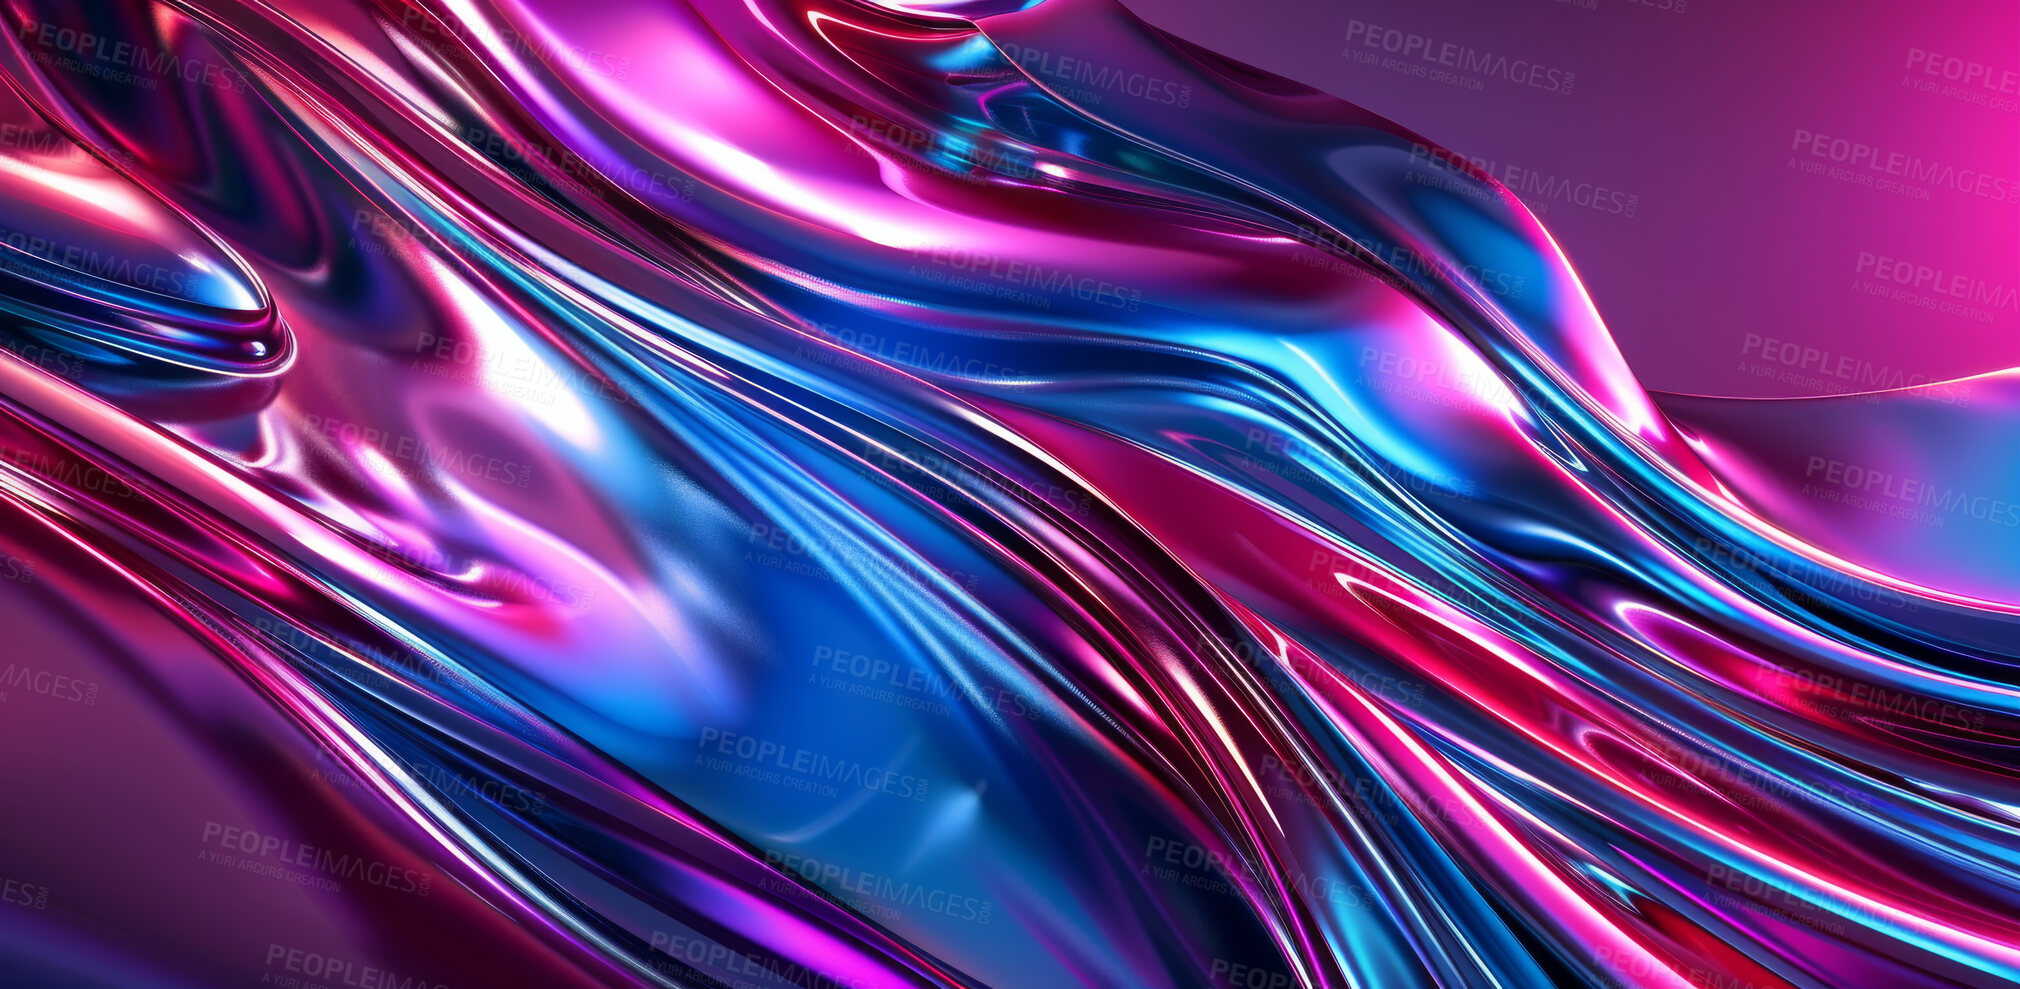 Buy stock photo Abstract, wallpaper and pattern with 3d waves, art or illustration isolated on  background. Texture, flow and design with gradient of motion, iridescent or graphic of neon liquid on backdrop closeup